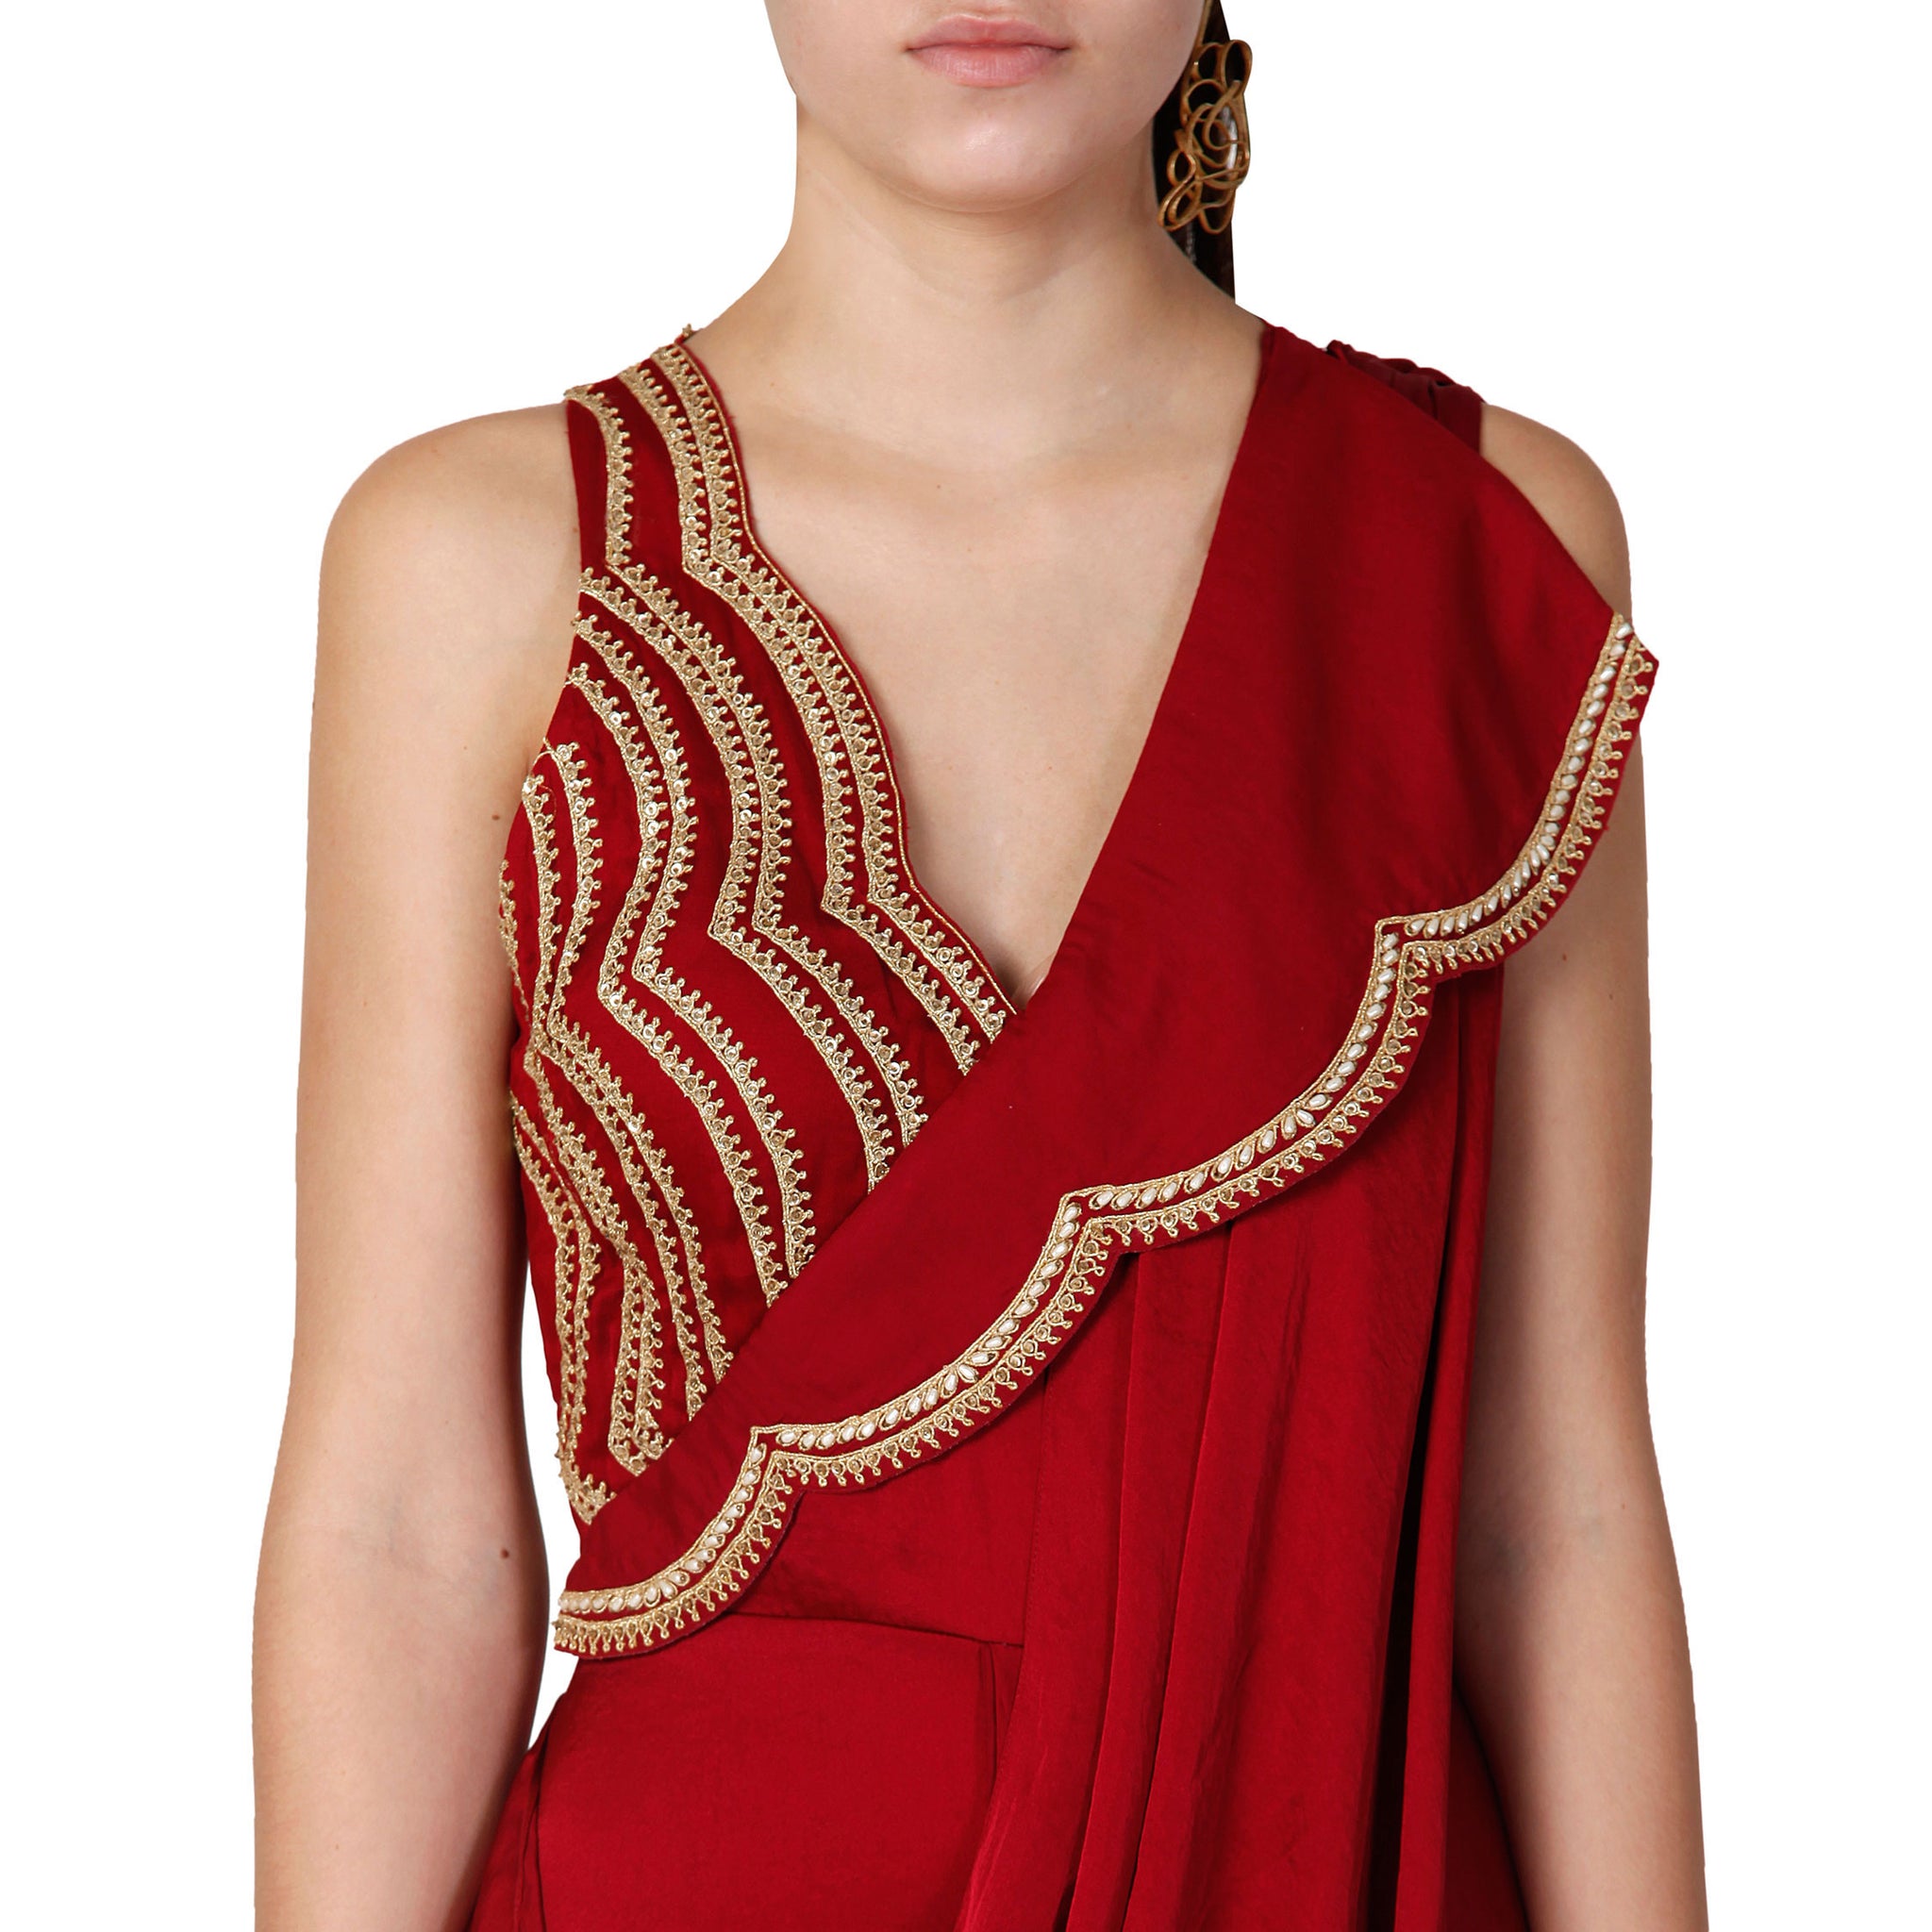 Embroidered Pre-Draped Sari with Lapel Detail